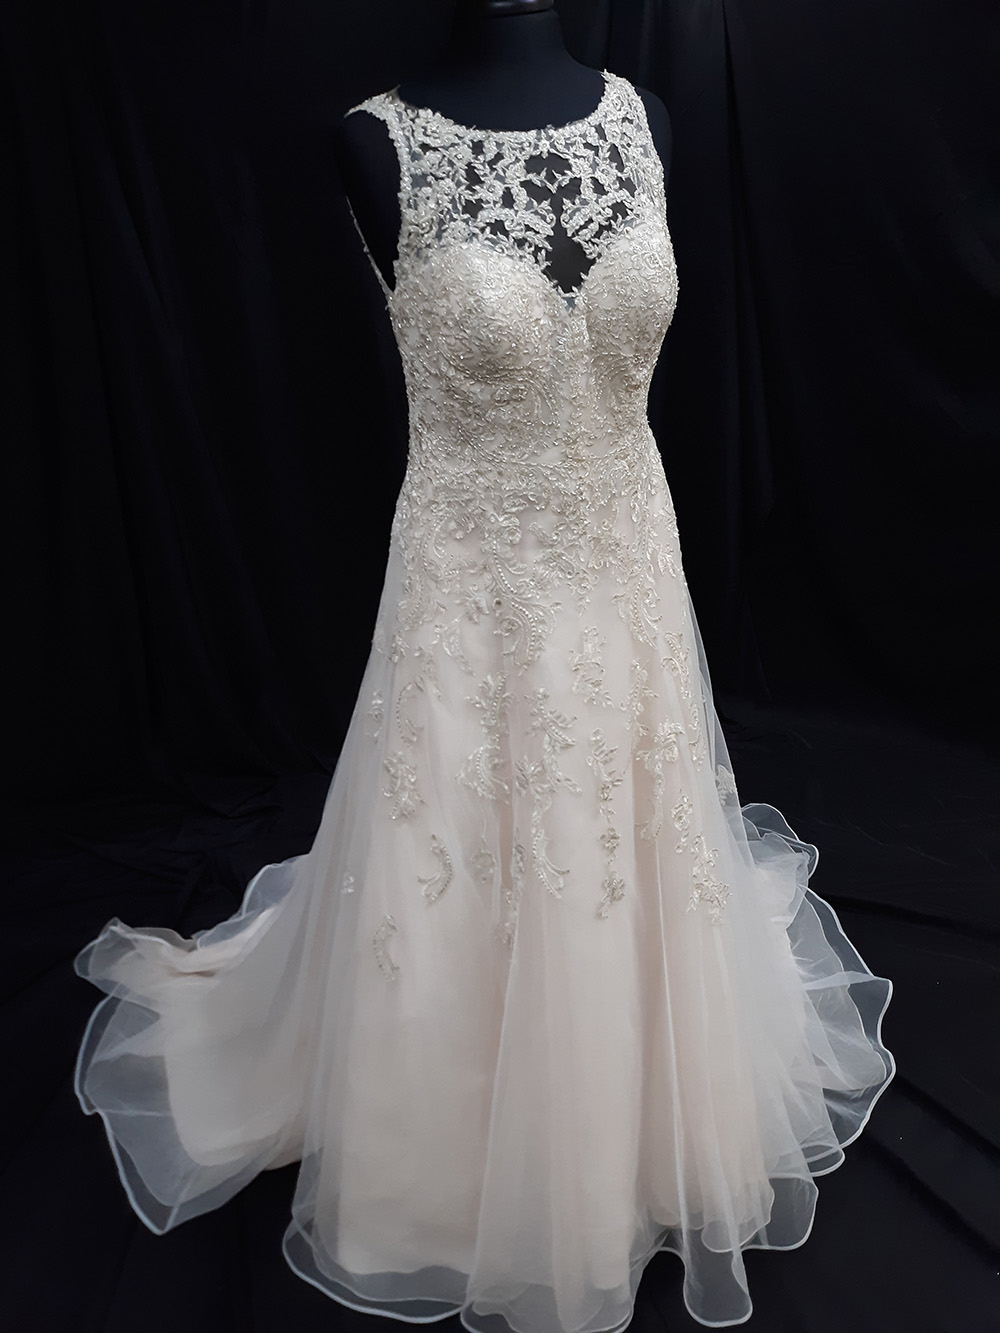 white wedding dress with silver beading